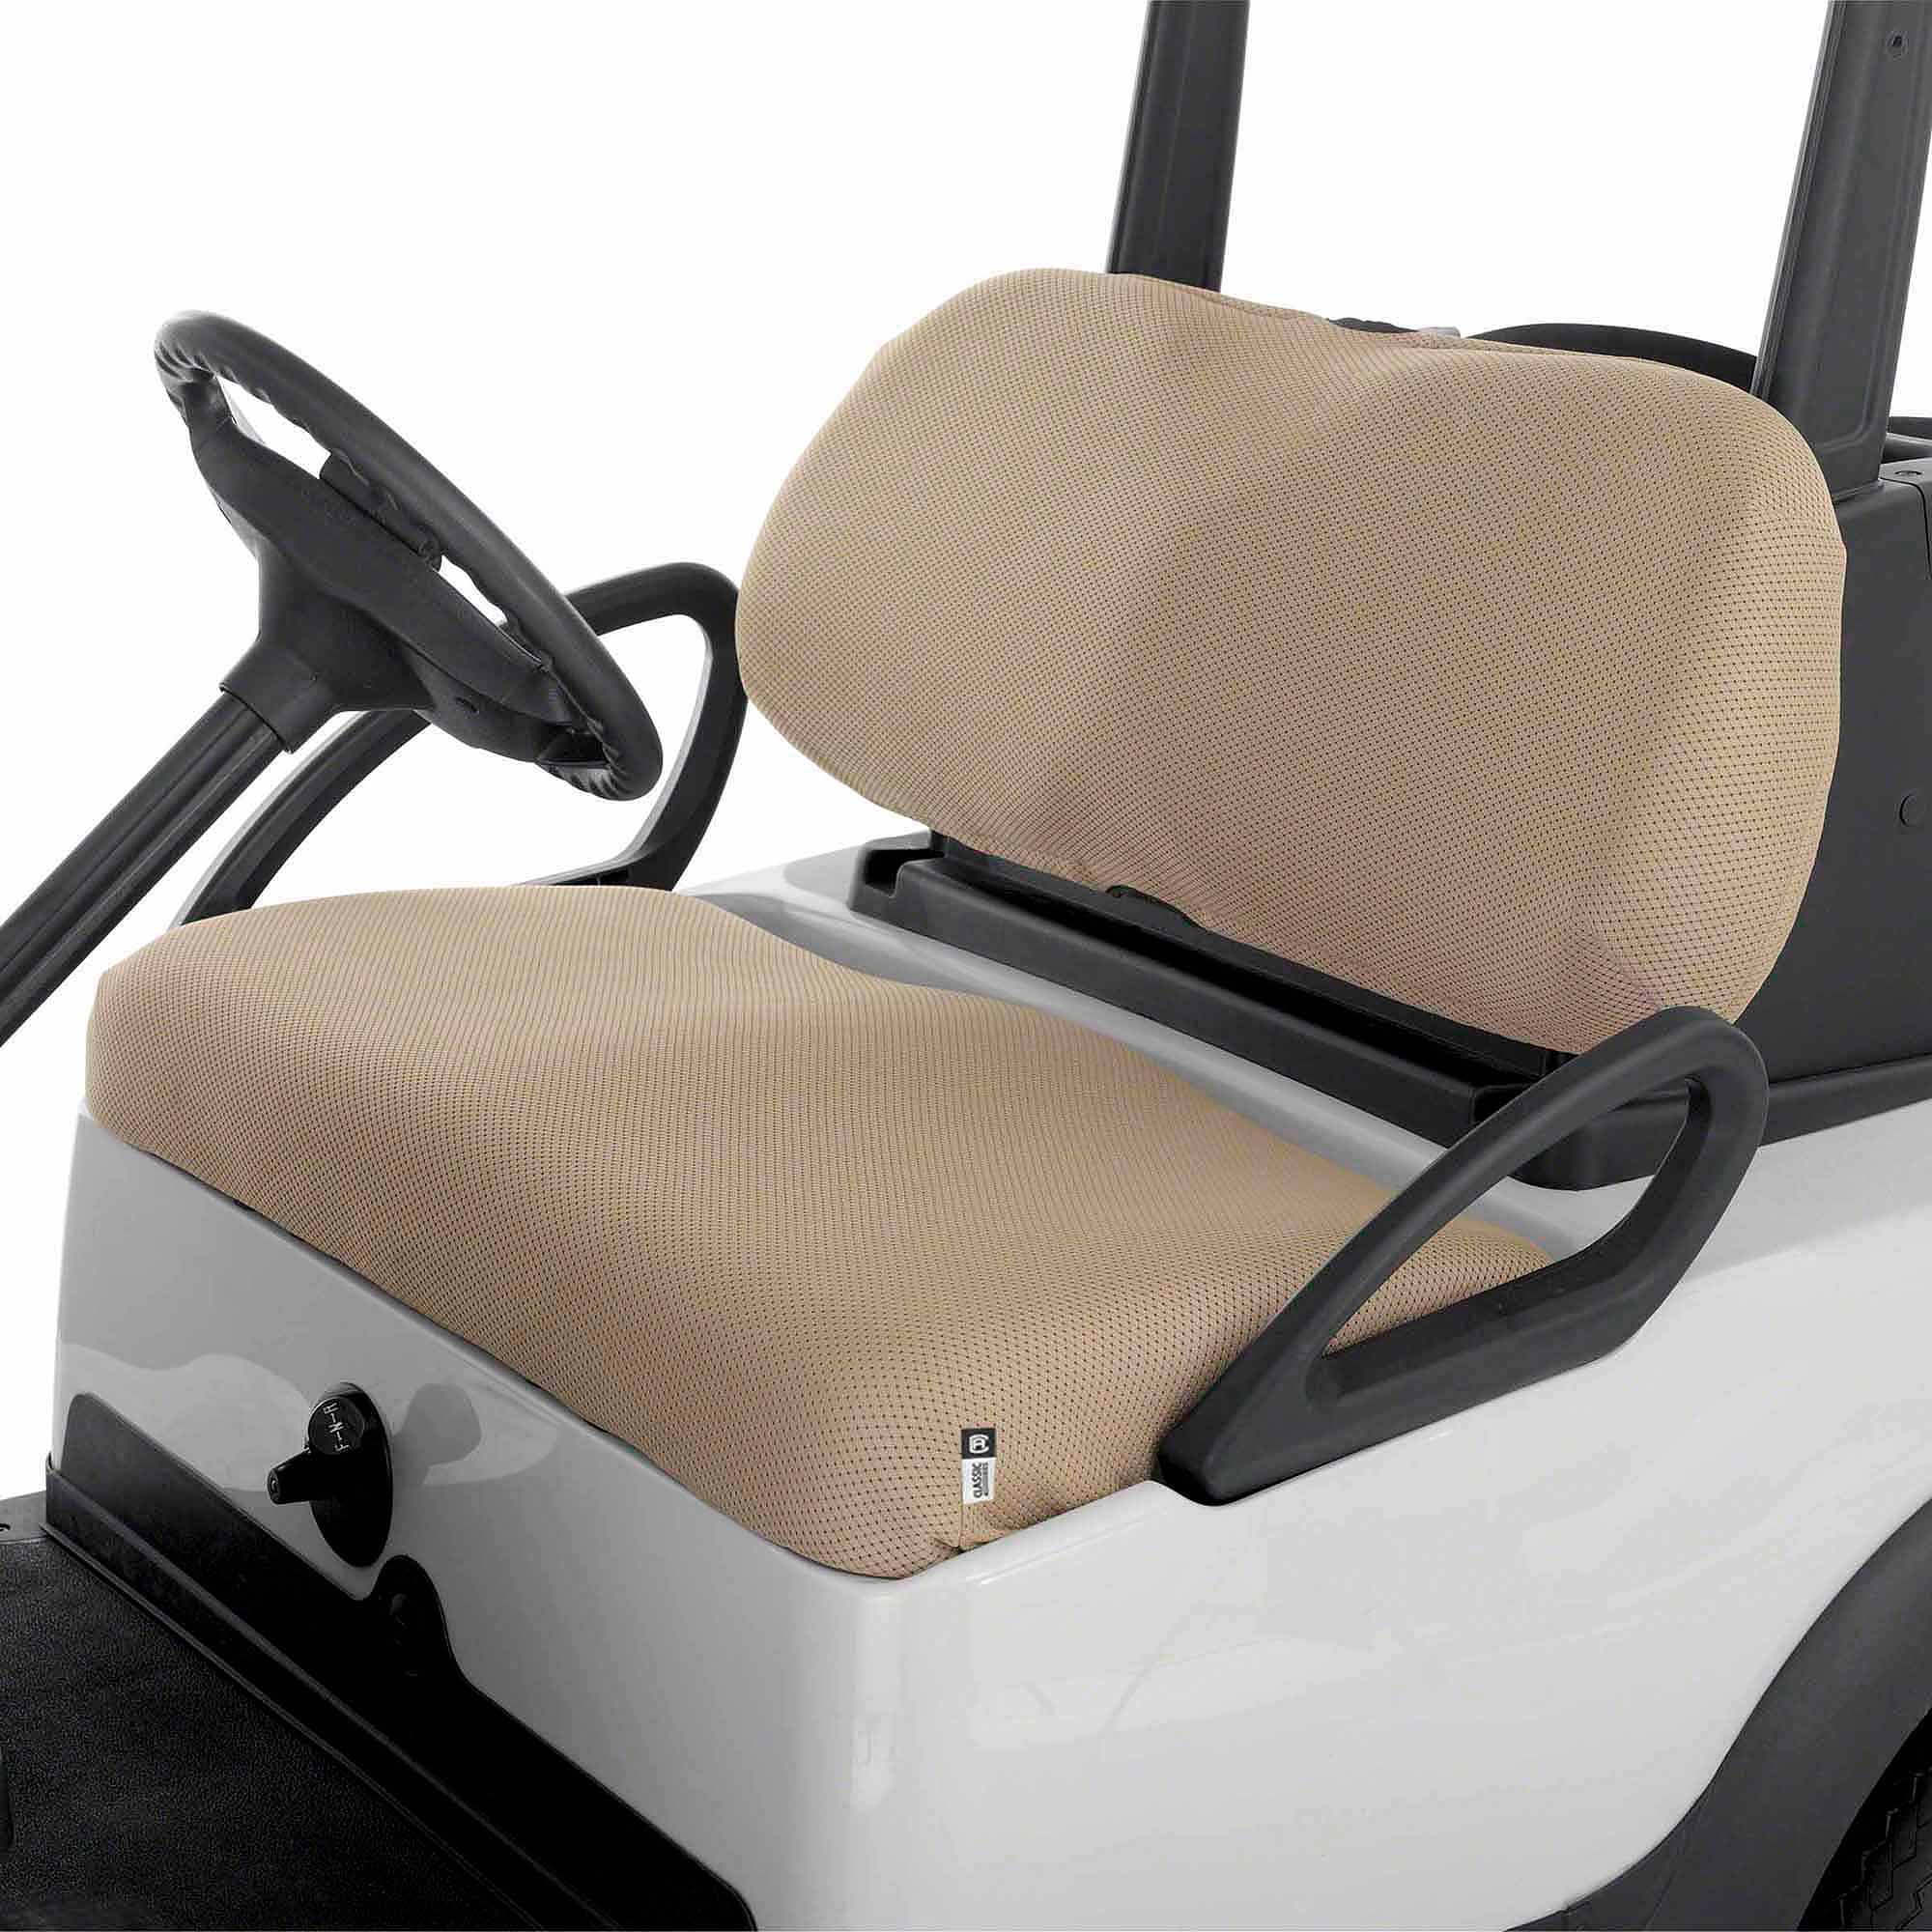 Custom Golf Cart Front Seat Replacement & Custom Deluxe Covers Set (Ivory  White)